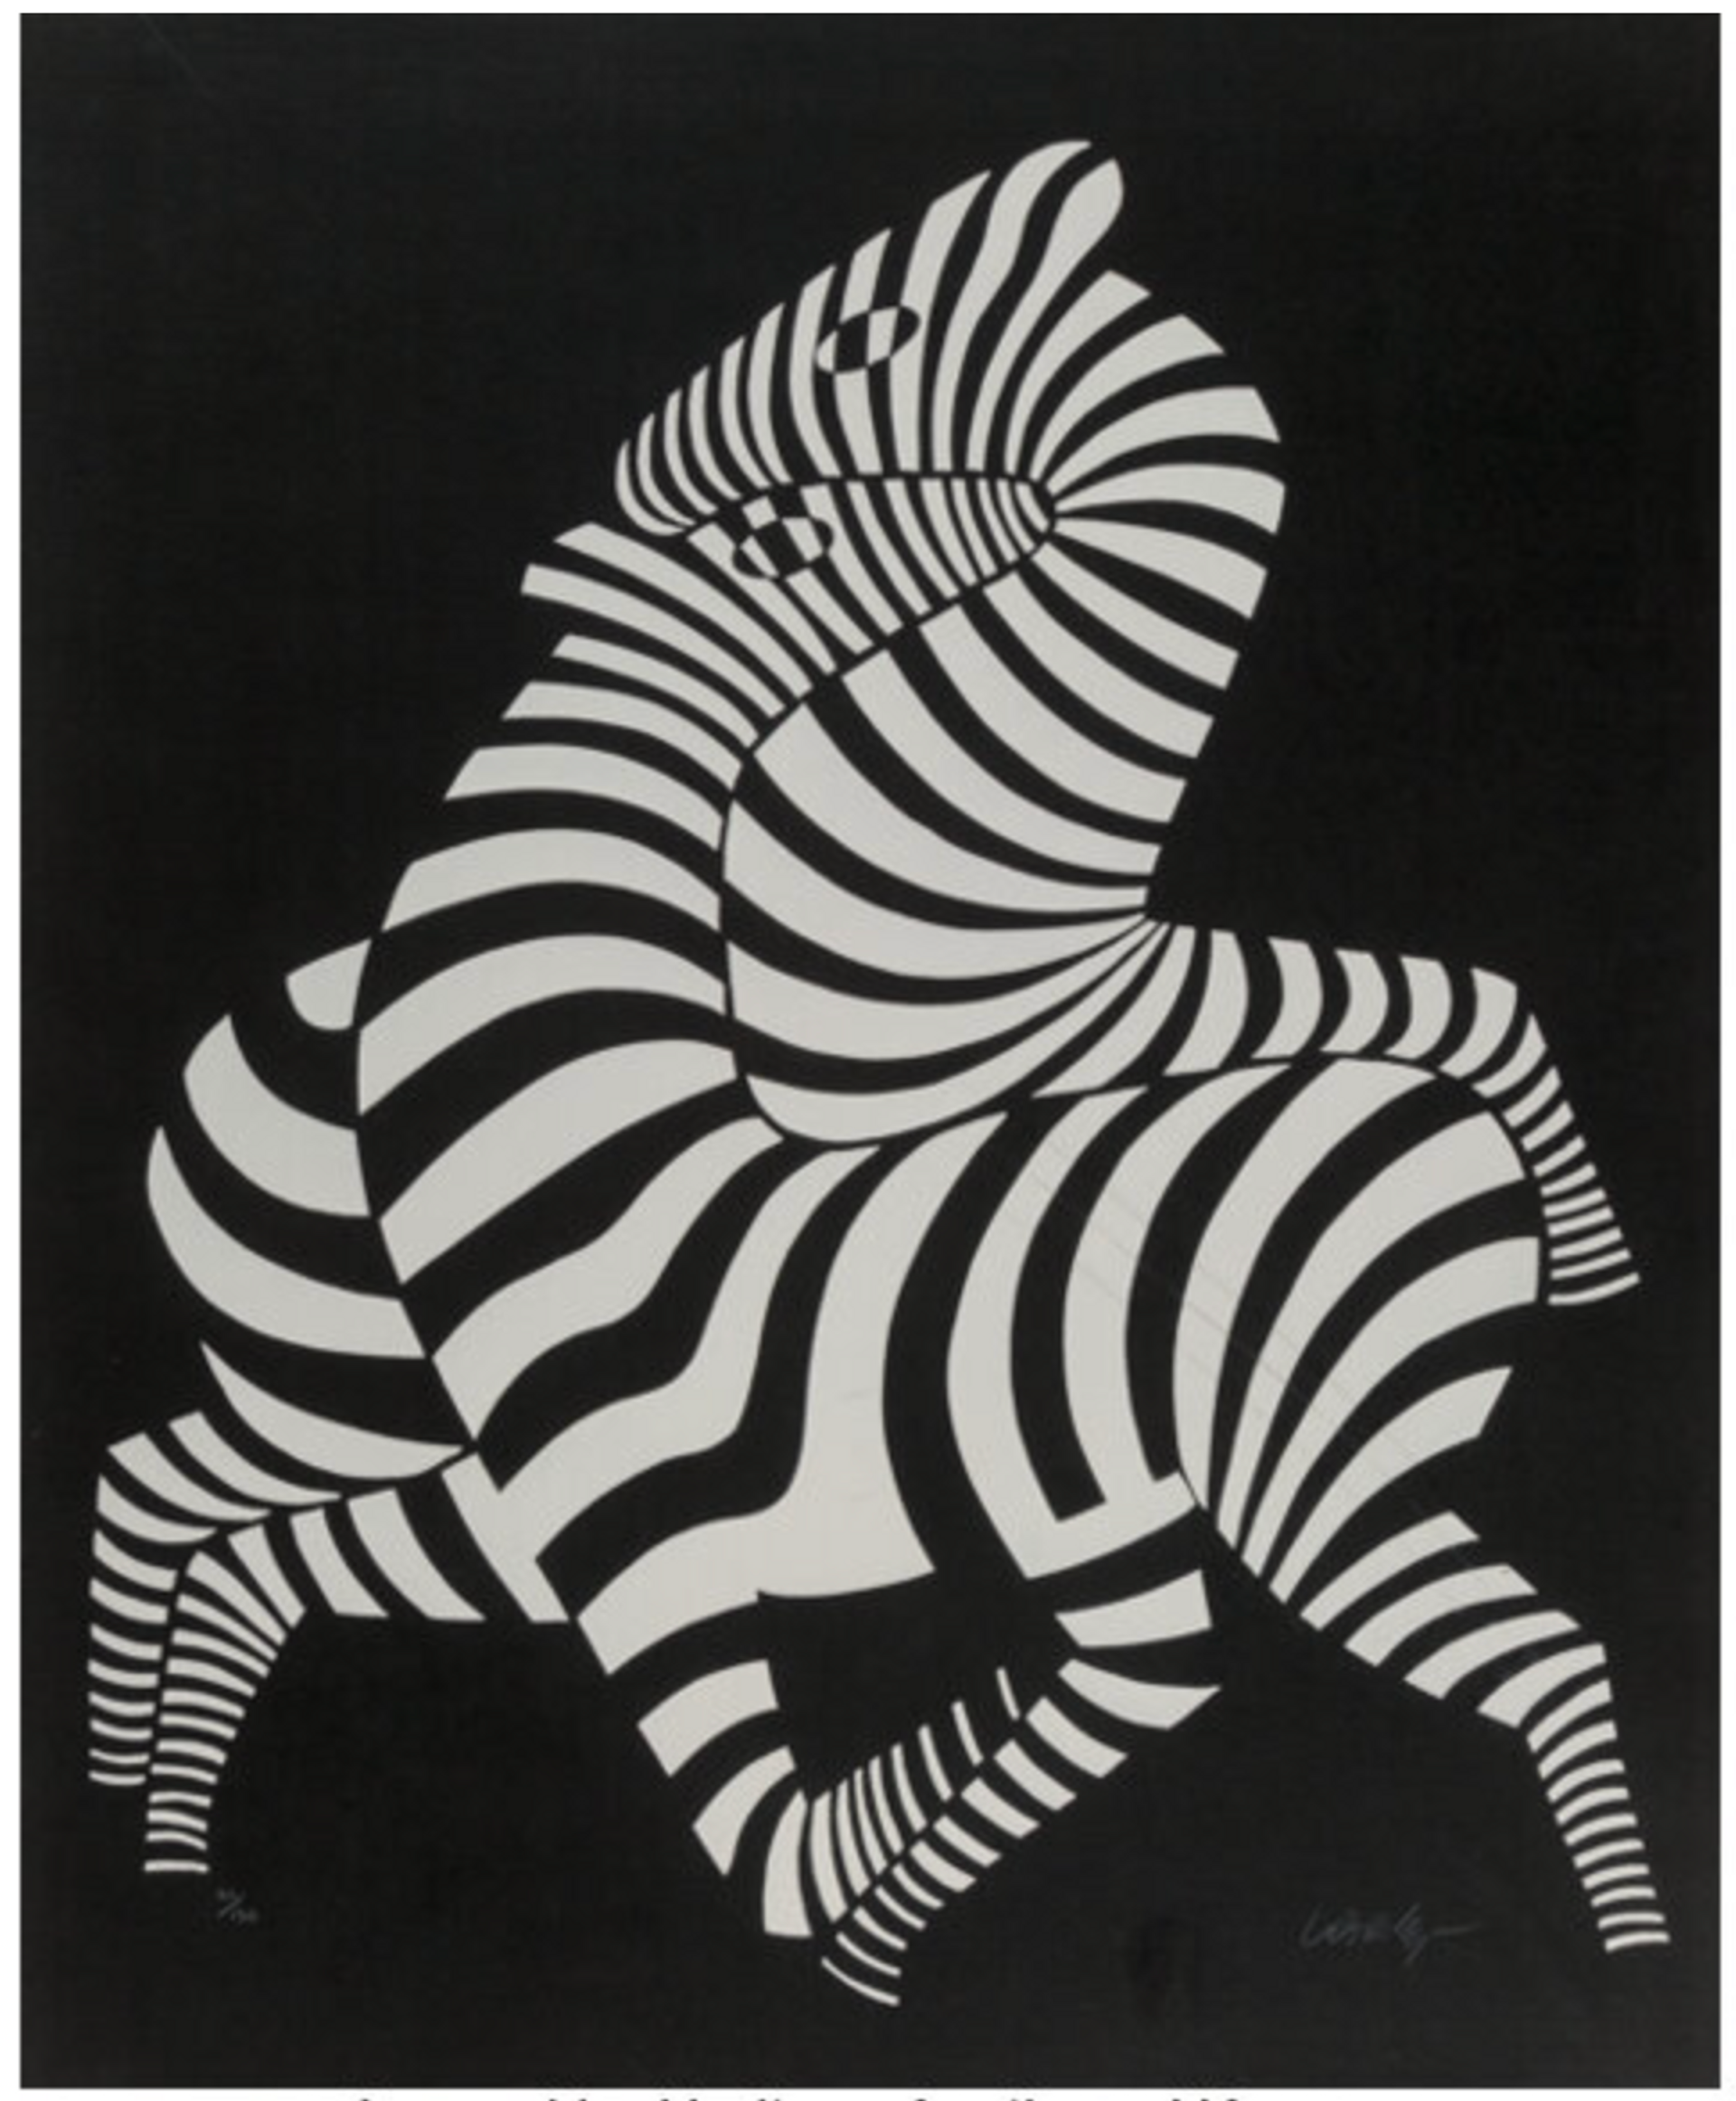 Two zebras intertwined by the neck and limbs creating an optical illusion aganist a black background.